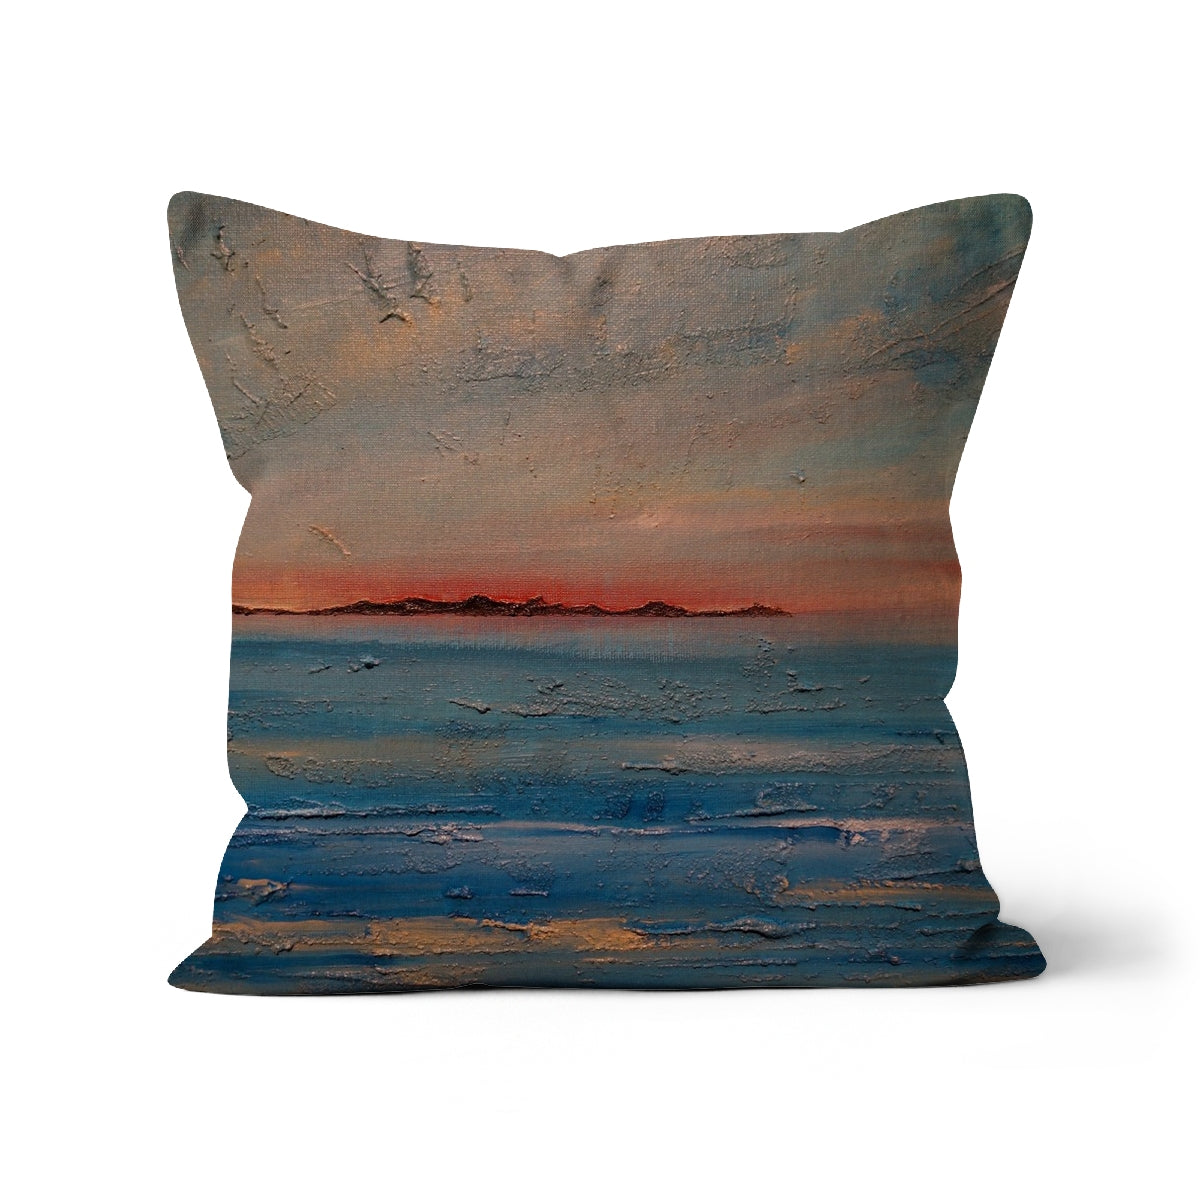 Gigha Sunset Art Gifts Cushion-Cushions-Hebridean Islands Art Gallery-Linen-22"x22"-Paintings, Prints, Homeware, Art Gifts From Scotland By Scottish Artist Kevin Hunter